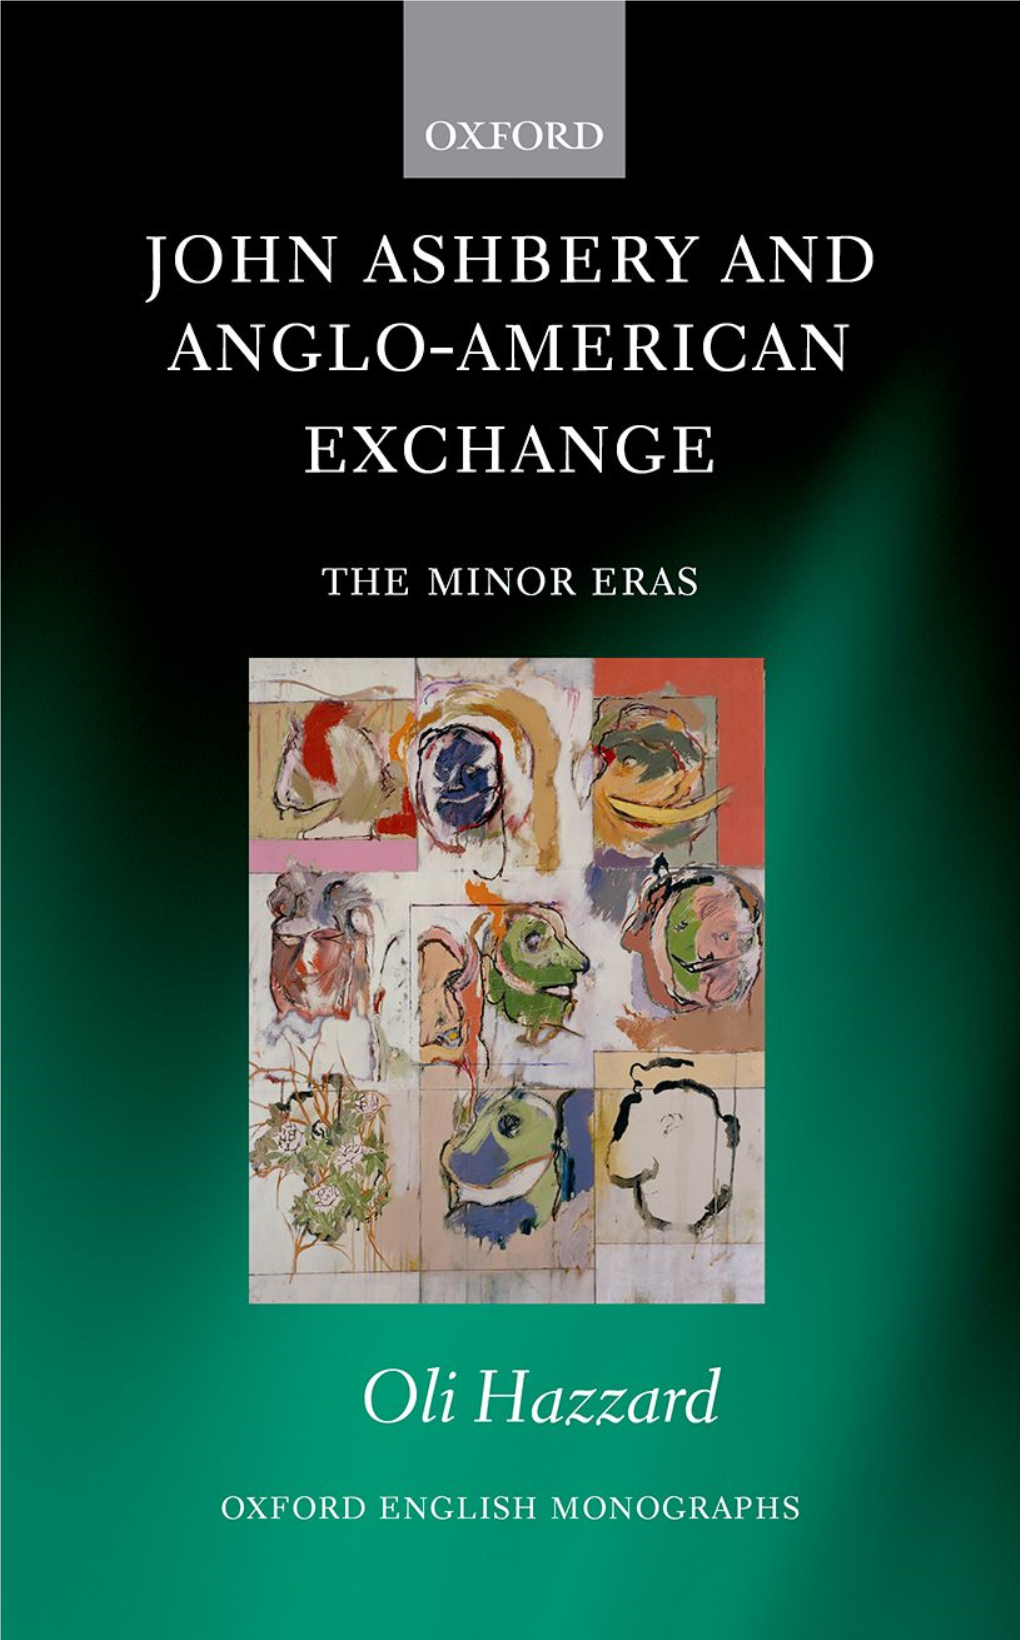 John Ashbery and Anglo-American Exchange: the Minor Eras